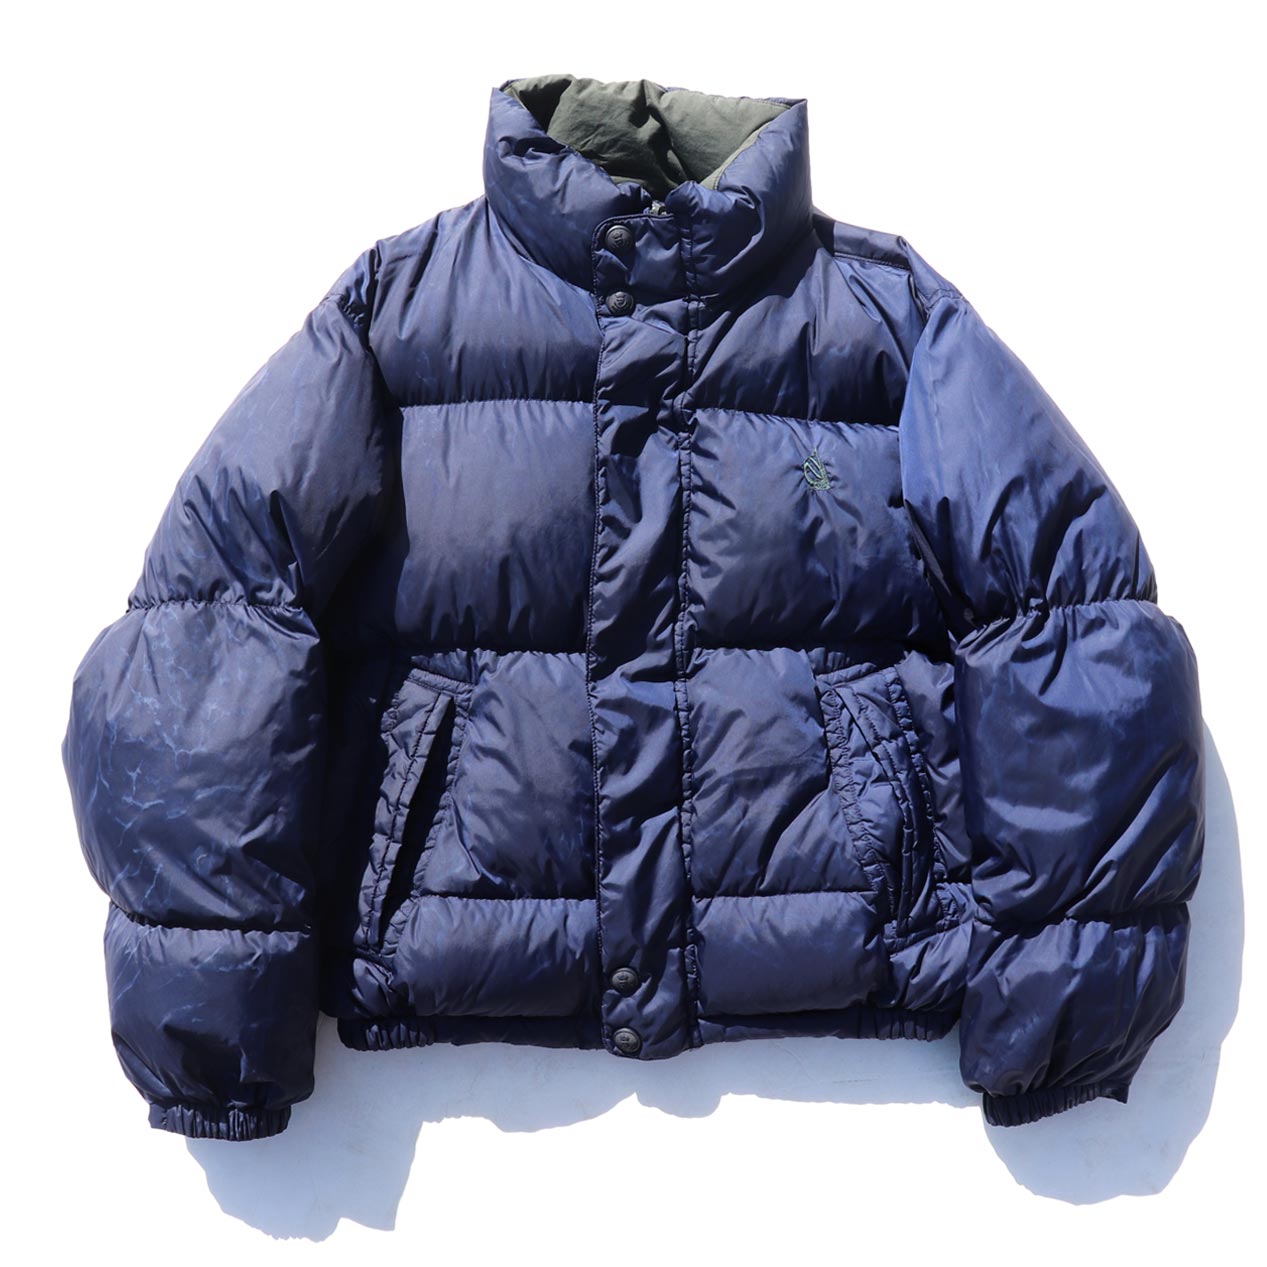 old "Lotto" reversible down jacket